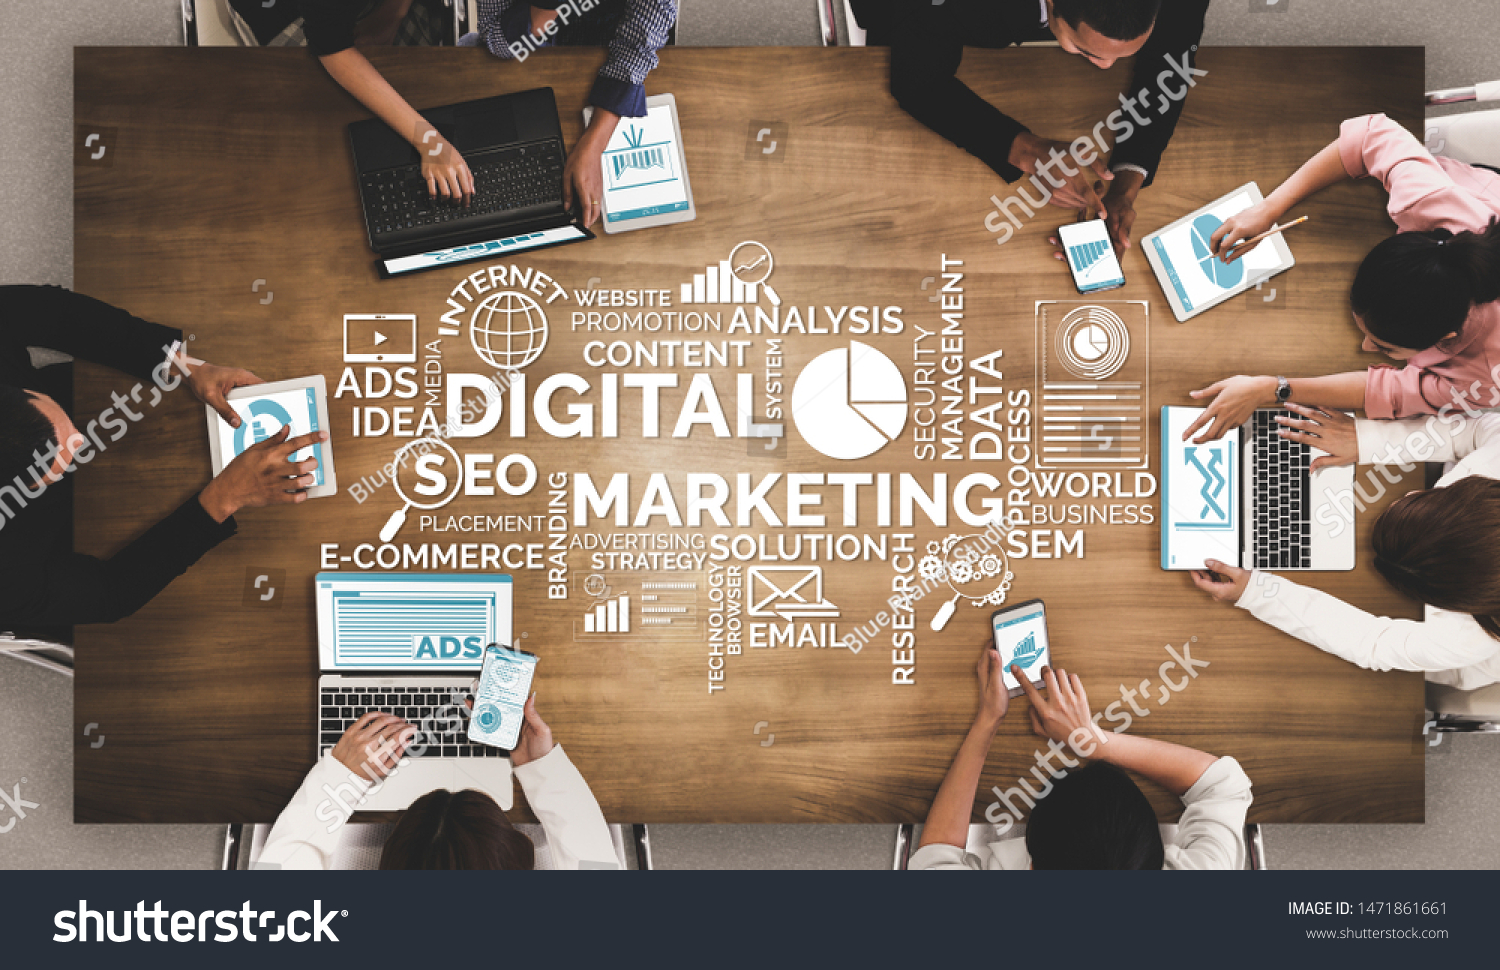 Digital Marketing Technology Solution for Online Business Concept - Graphic interface showing analytic diagram of online market promotion strategy on digital advertising platform via social media. #1471861661